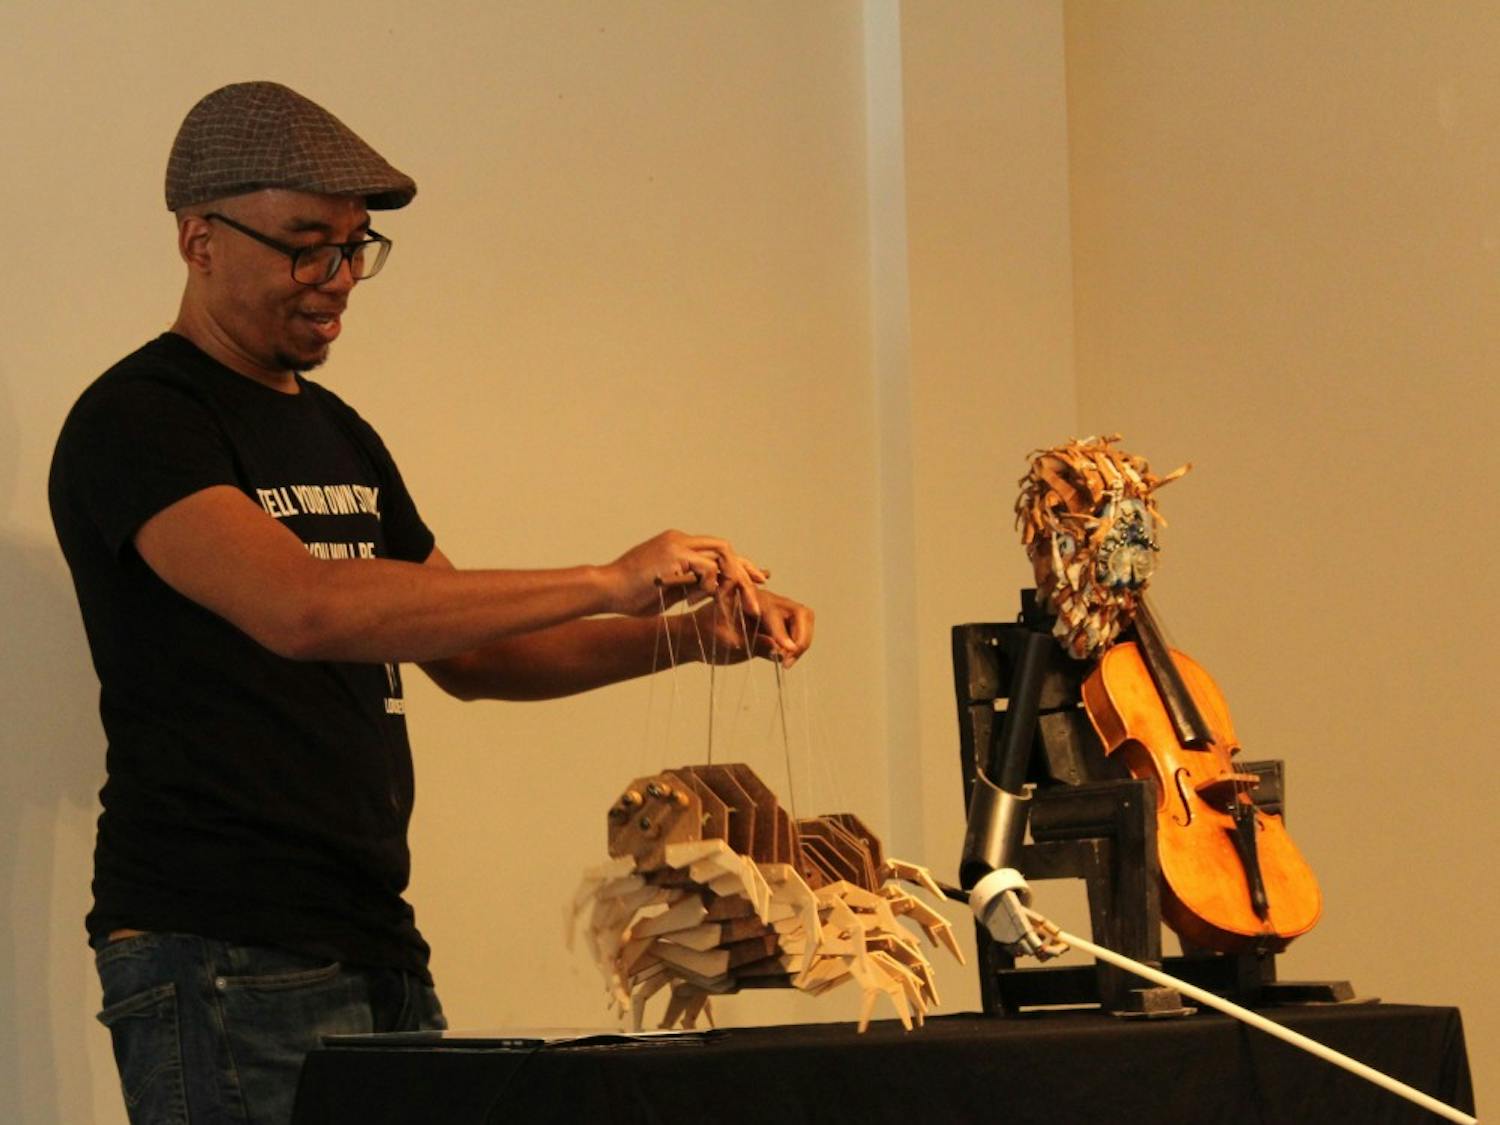 Tarish Pipkins, known as the master puppeteer Jeghetto, performs a puppet show at 109 E Franklin Street on Sunday, April 14, 2019. The pop up art gallery coincides with Arts Everywhere 2019.